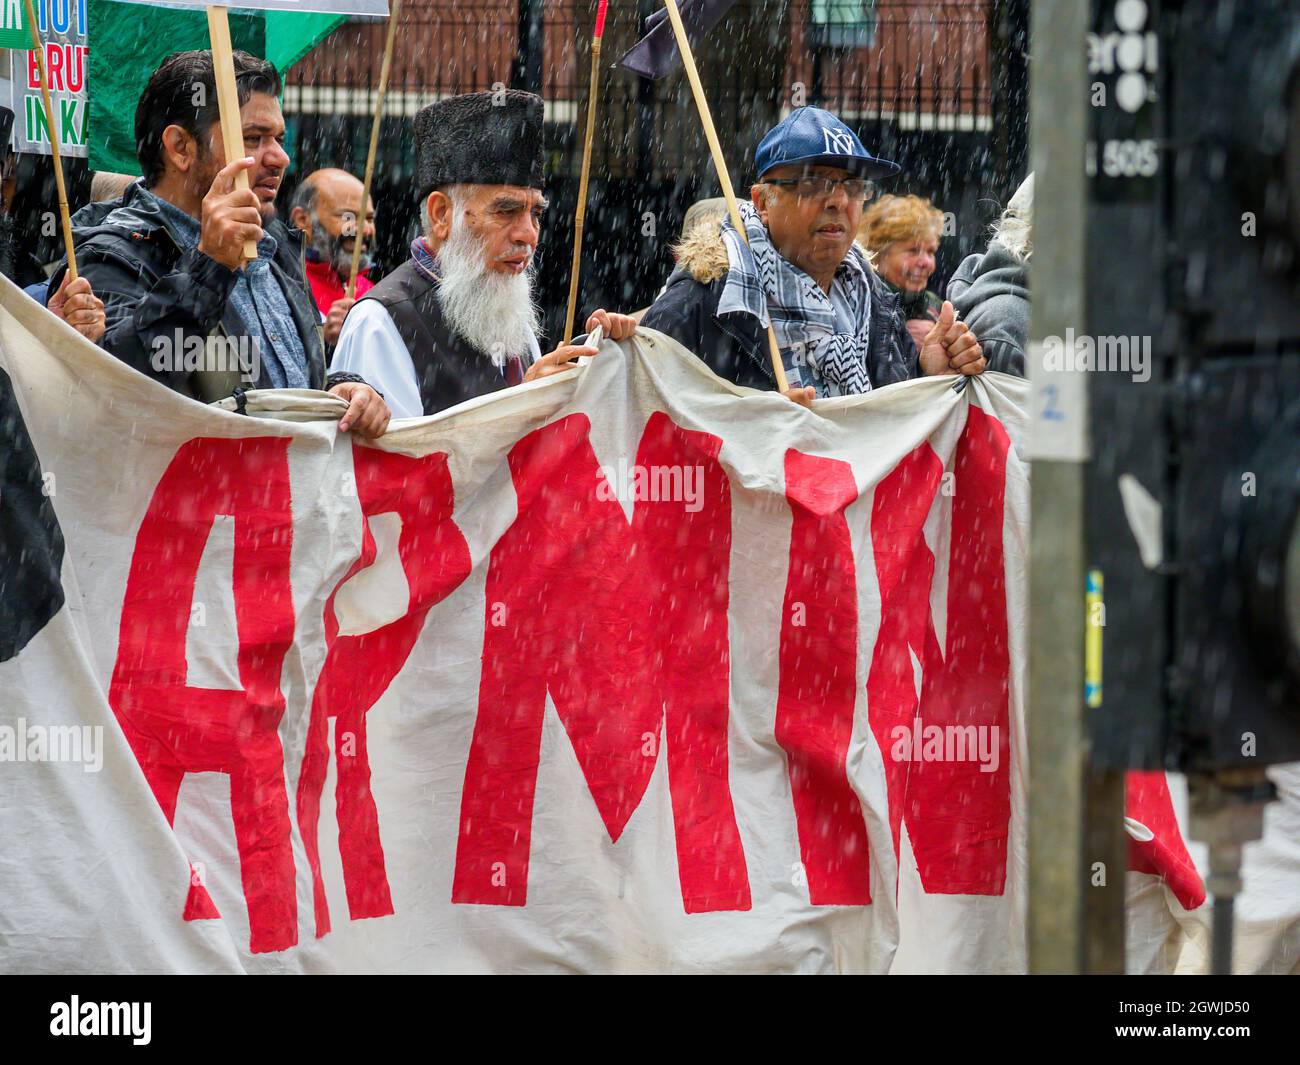 Manchester Muslim protest march at Tory party conference men holding banner in a heavy rain storm Stock Photo